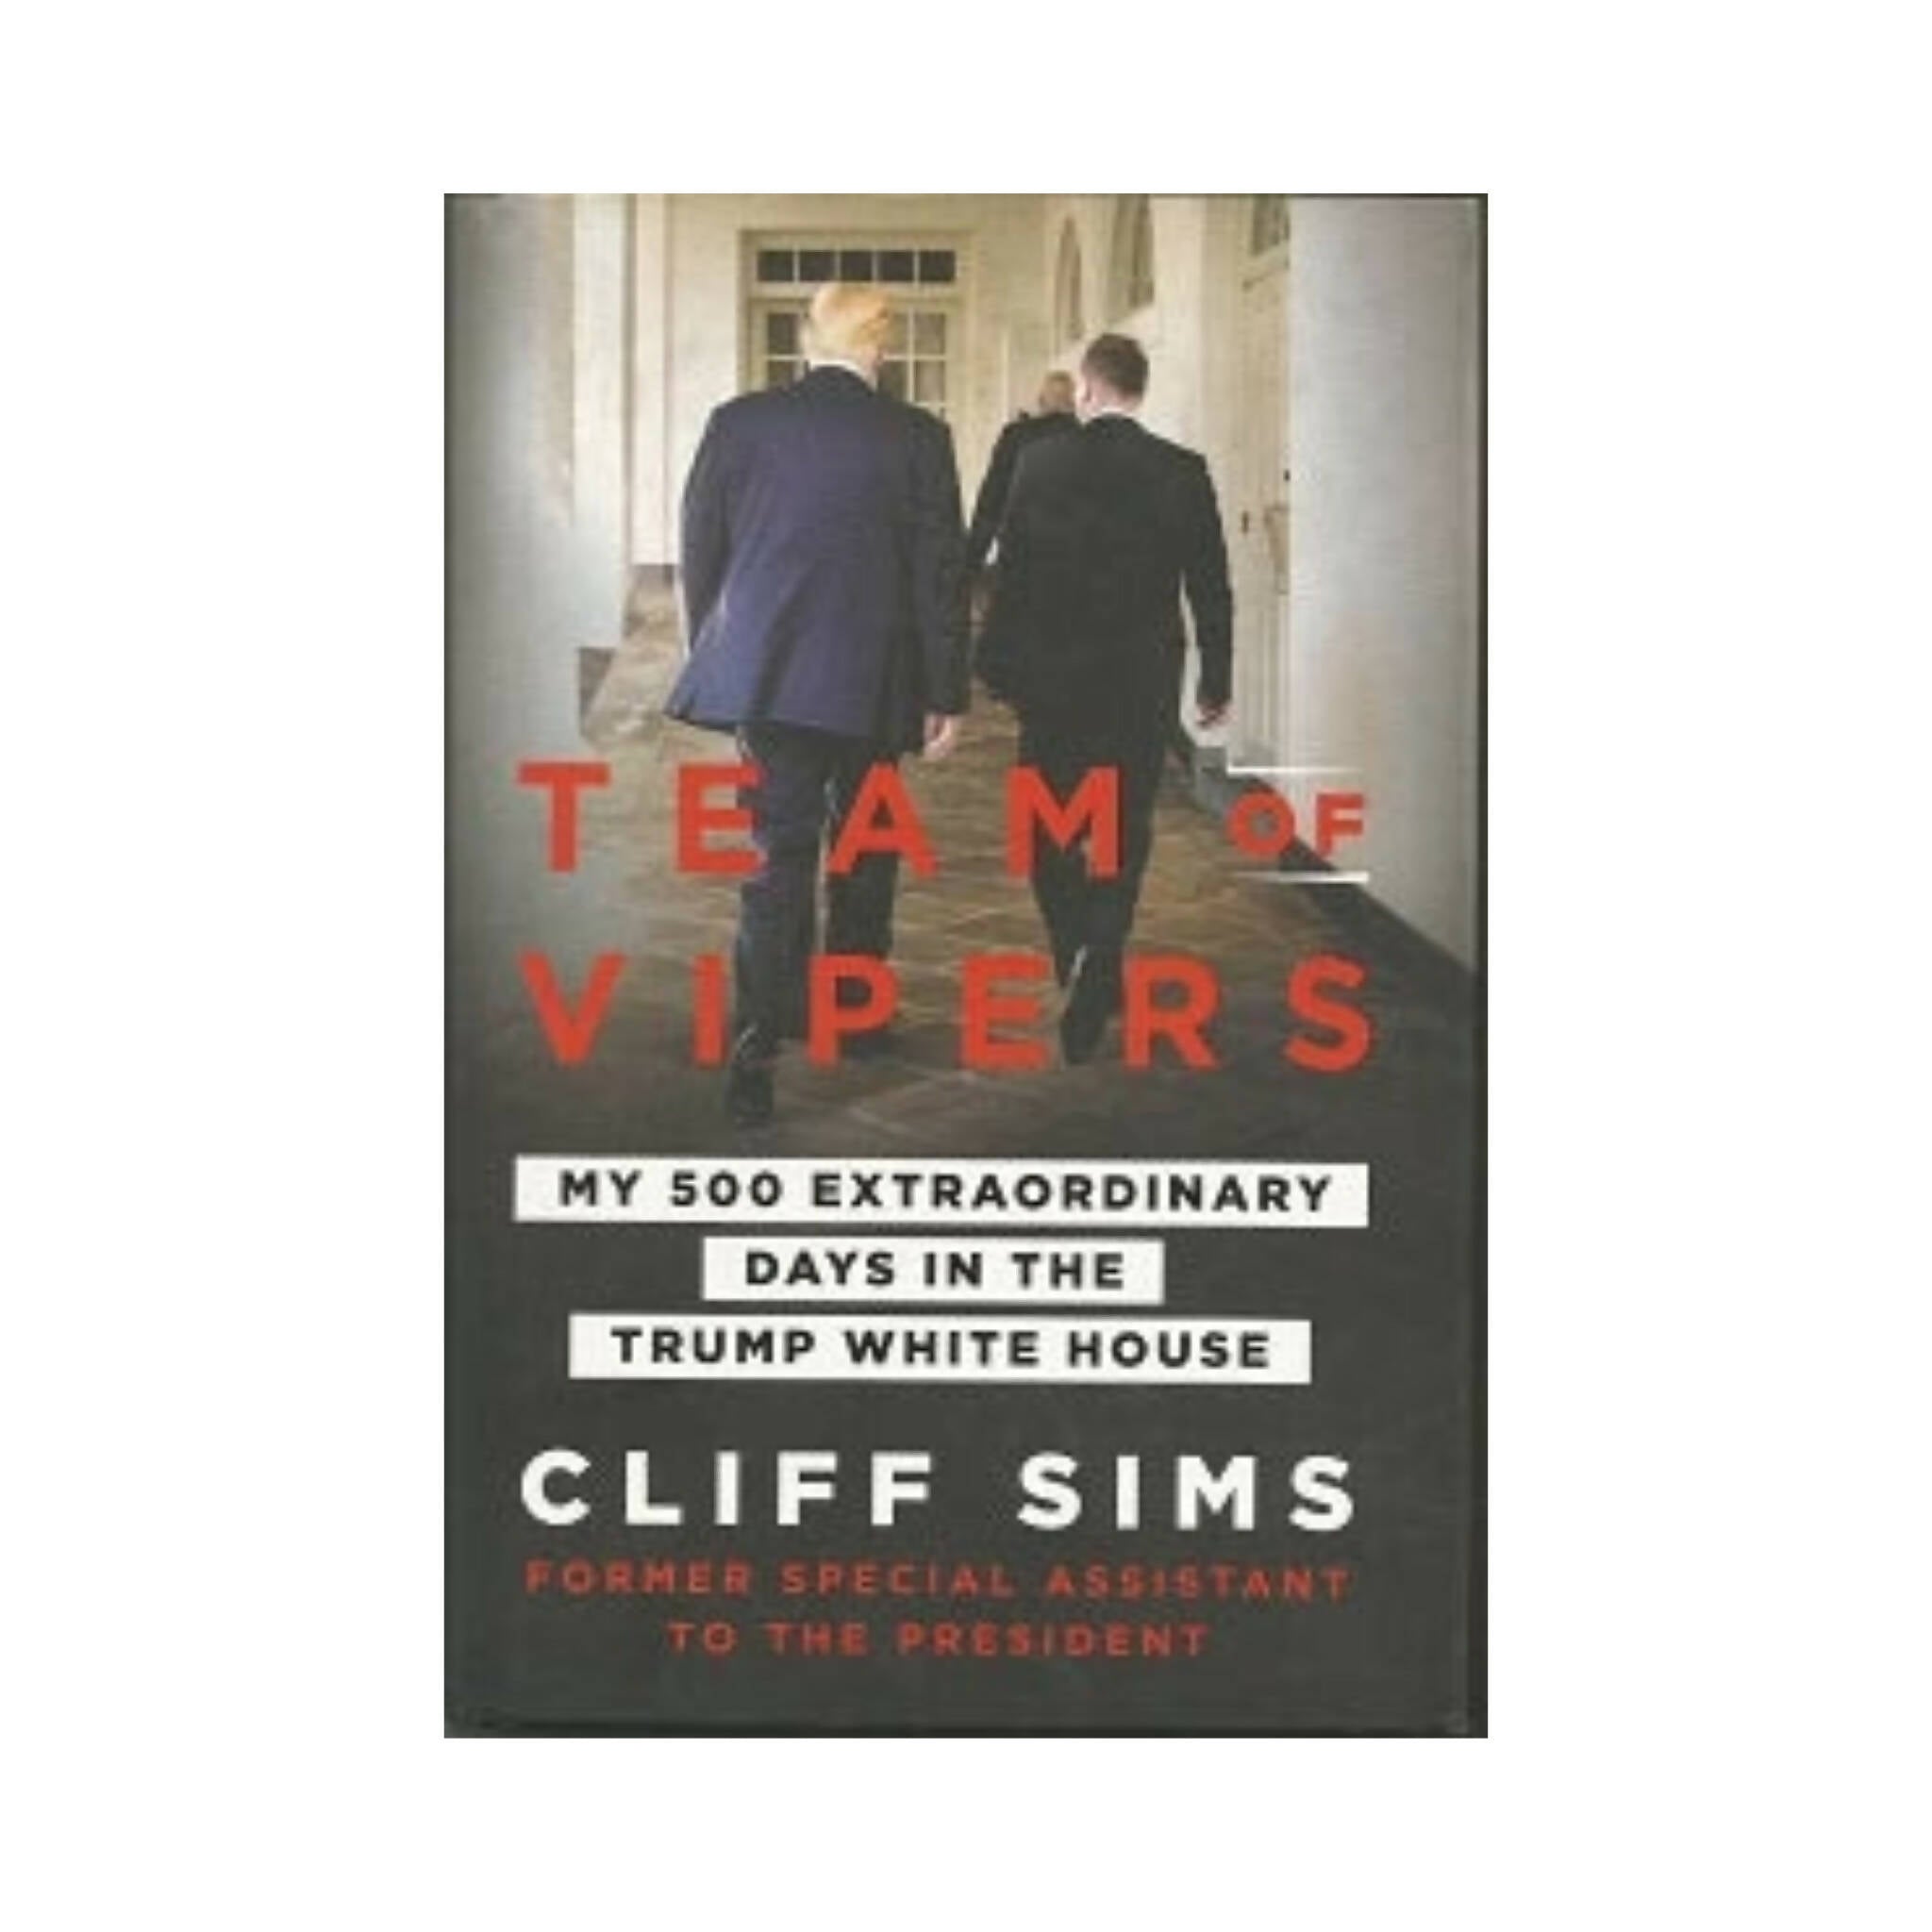 Book, Team of Vipers, My 500 Extraordinary Days in the Trump White House